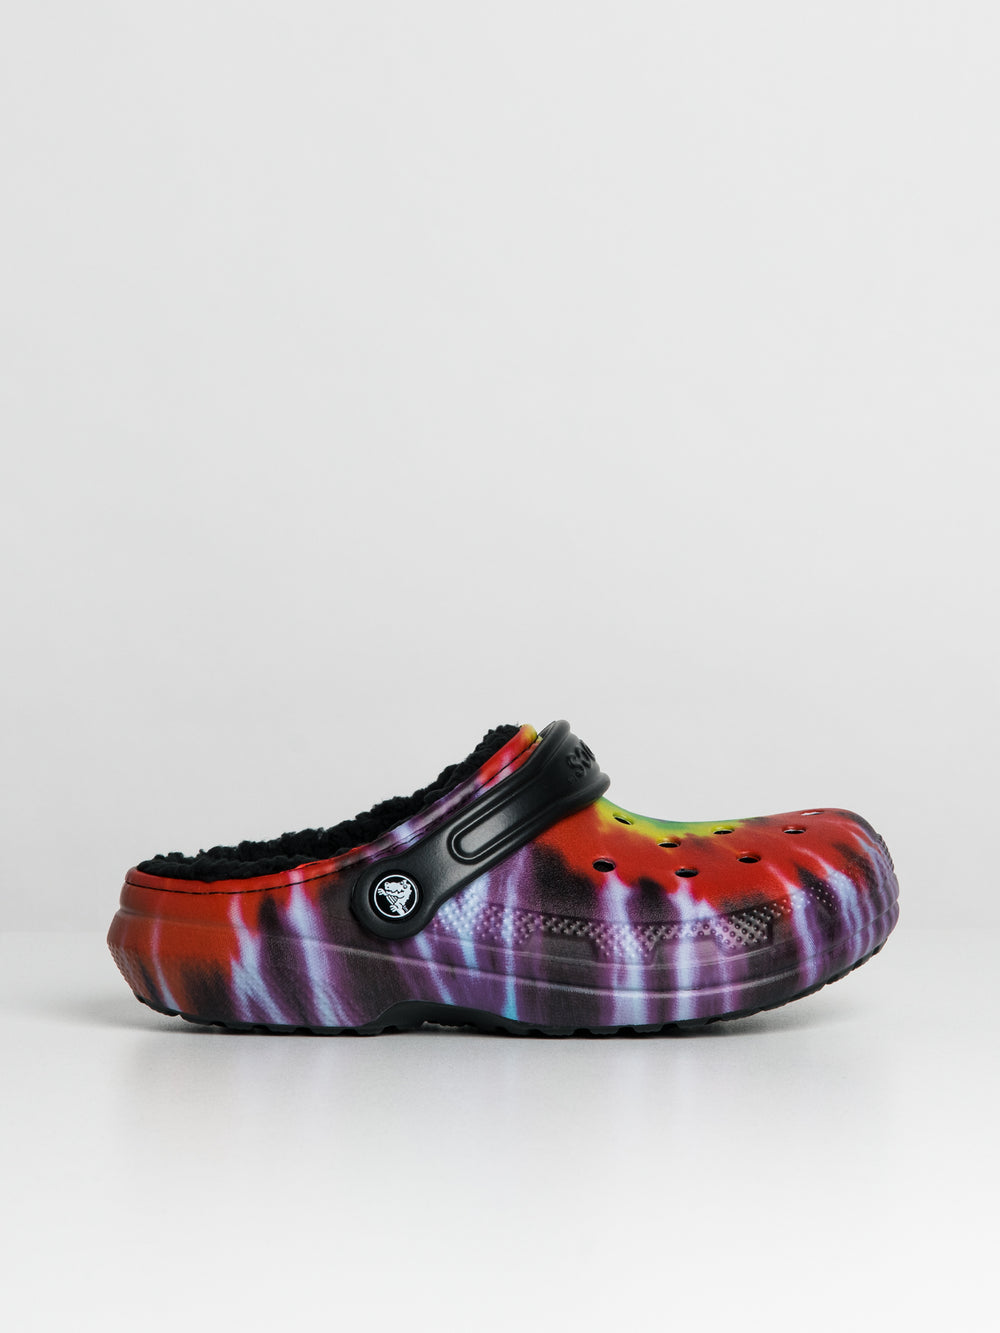 WOMENS CROCS CLASSIC LINED TIE DYE GRAPHIC CLOGS - CLEARANCE